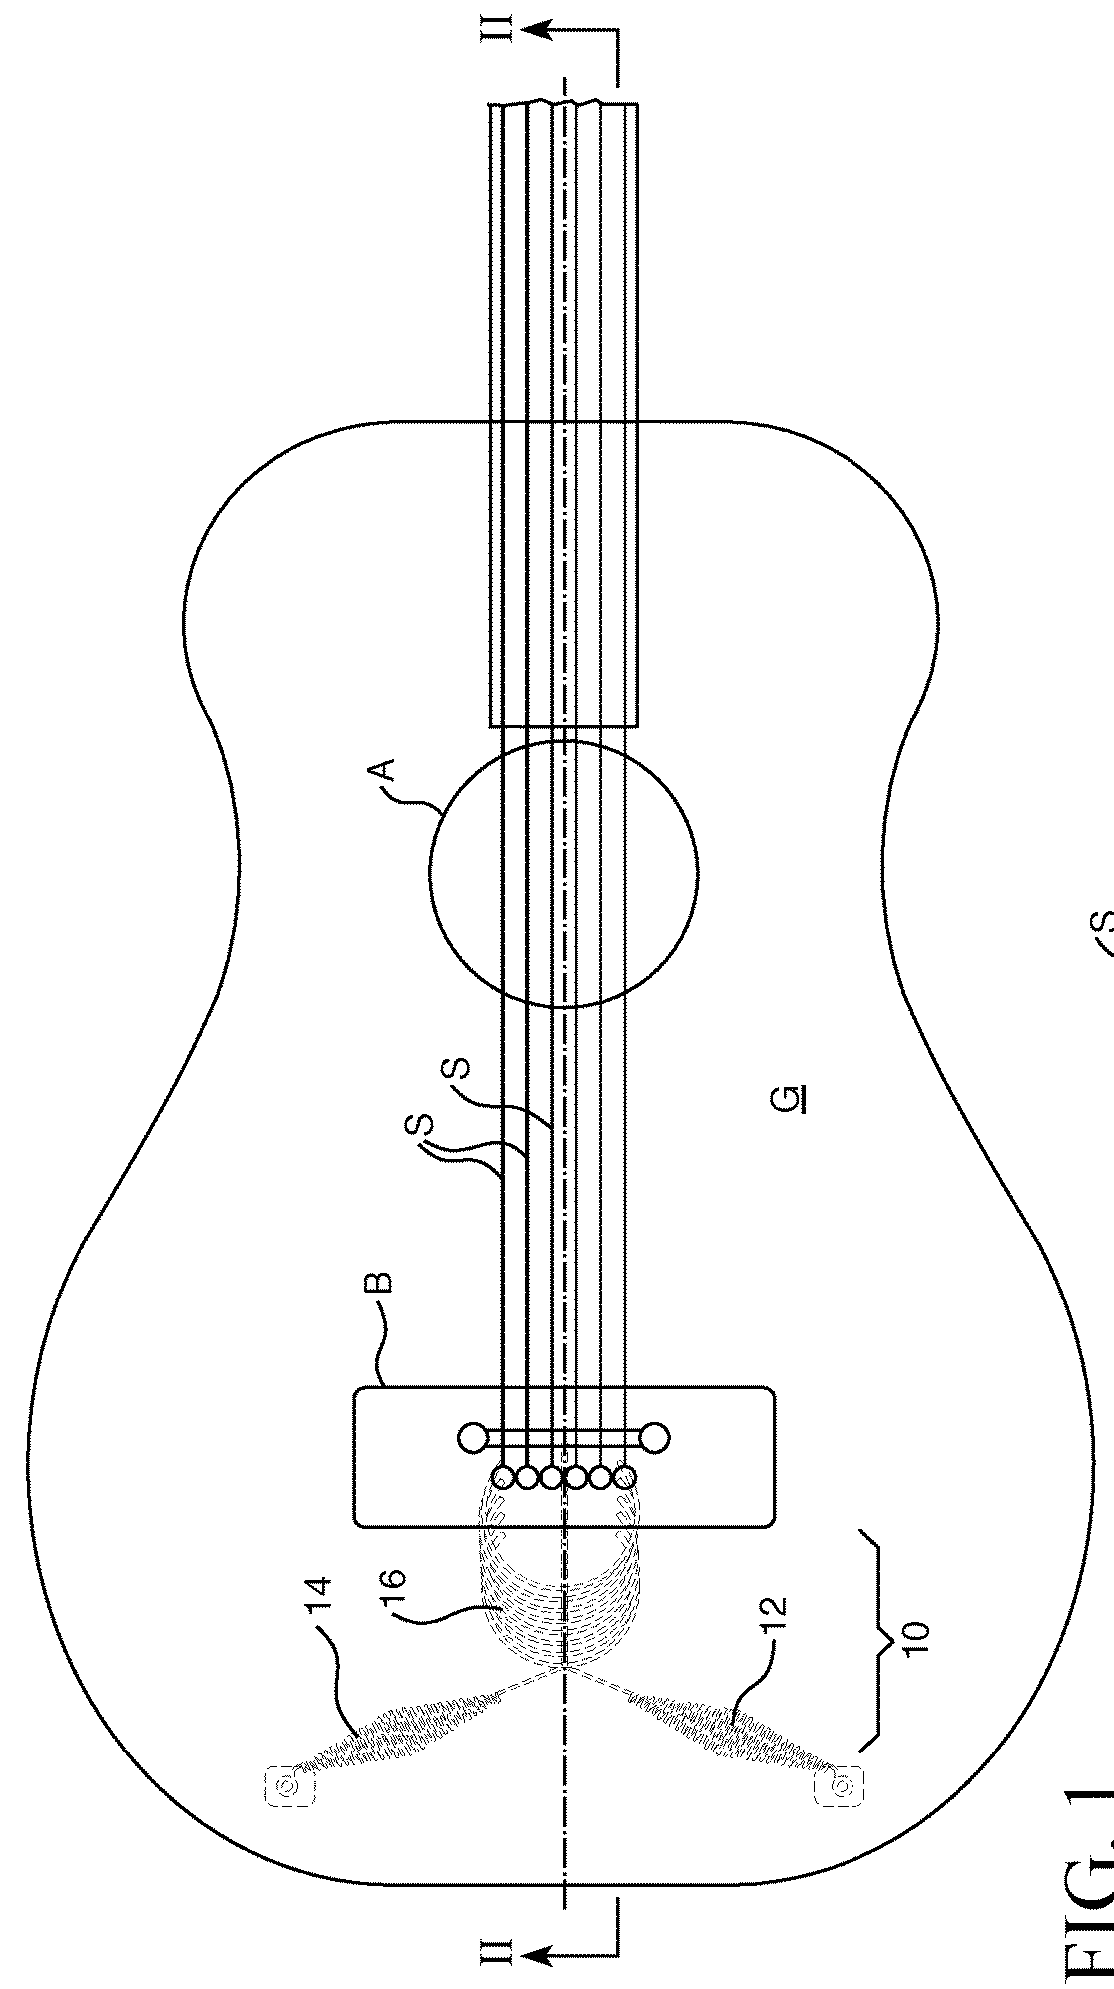 Torsion arm, connecting rod and coil configuration improvements for acoustic guitars and other stringed instruments